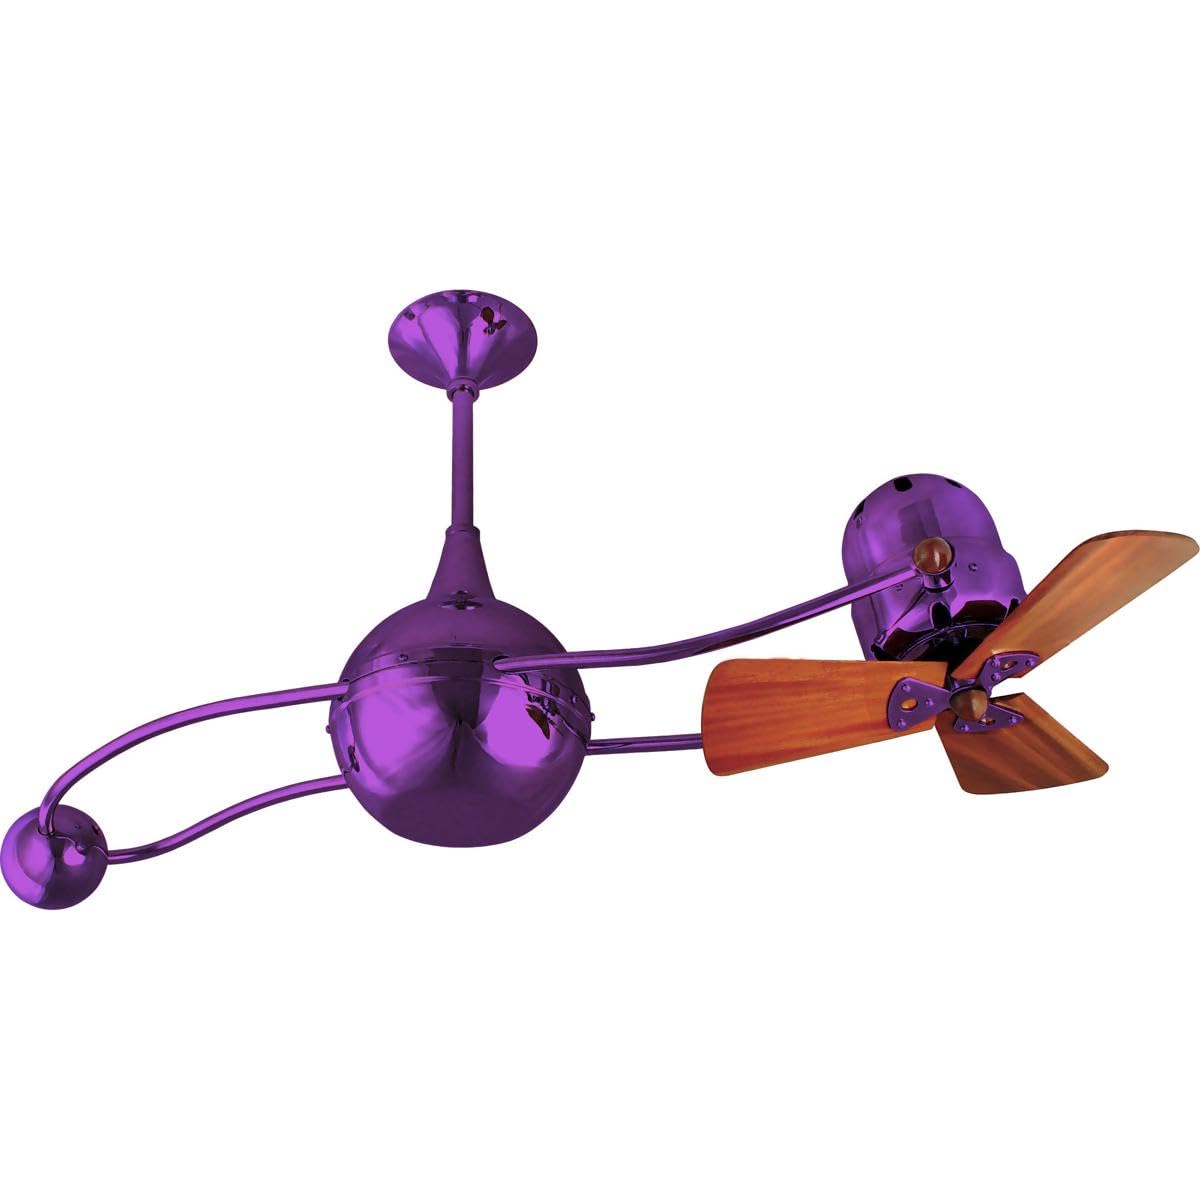 Matthews Fan B2K-LTPURPLE-WD Brisa 360° counterweight rotational ceiling fan in Ametista (Purple) finish with solid sustainable mahogany wood blades.